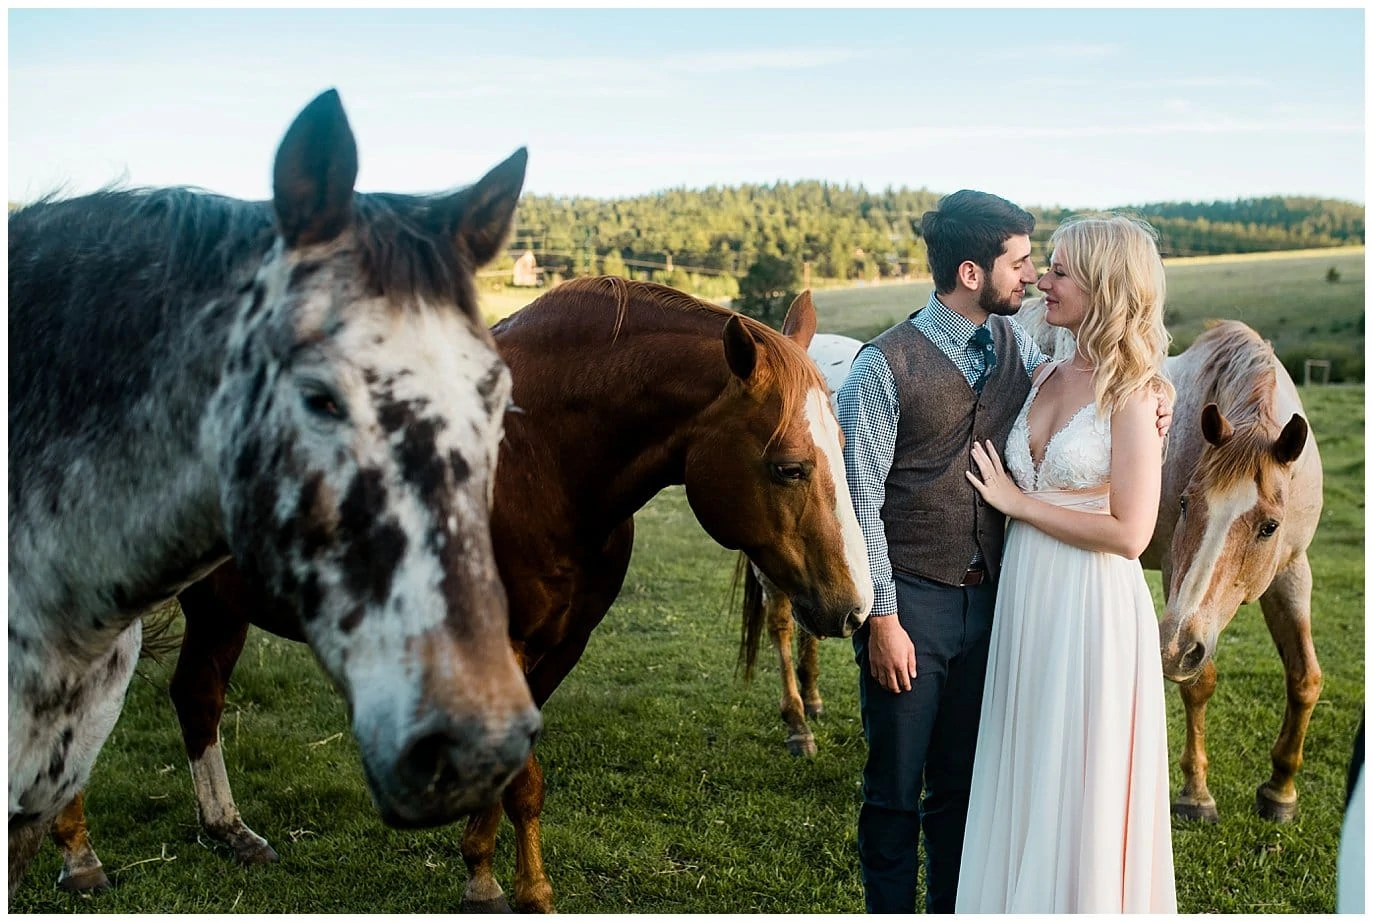 Bride and Groom with horses at Deer Creek Valley Ranch wedding by Denver Wedding Photographer Jennie Crate Photographer